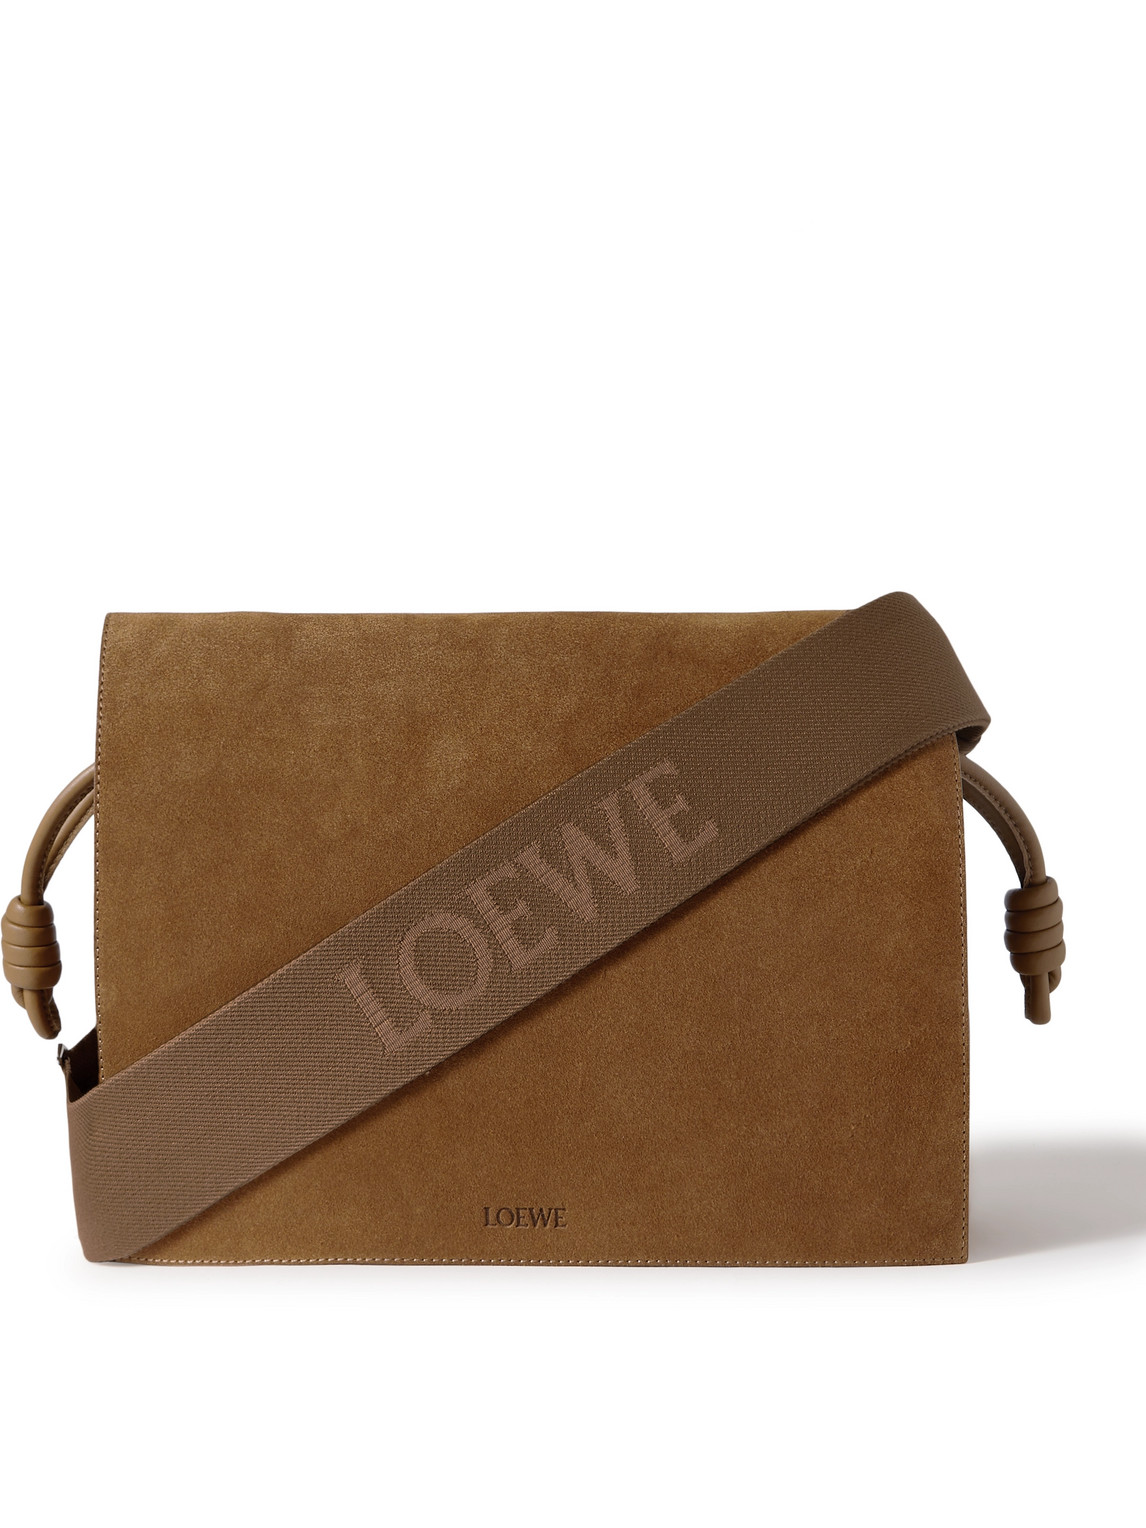 Loewe Flamenco Leather-trimmed Suede Messenger Bag In Neutrals